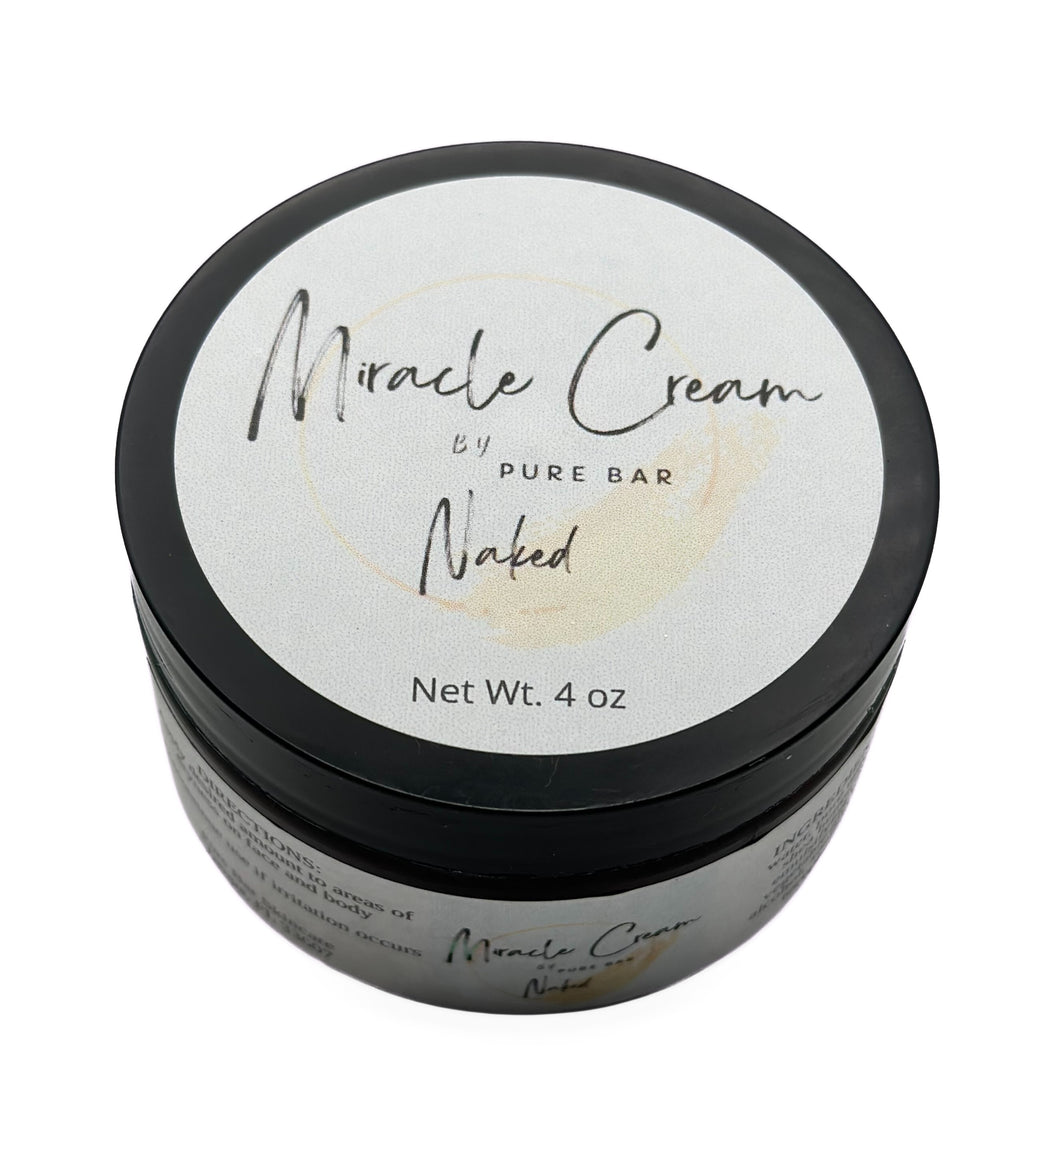 Miracle Cream - Naked